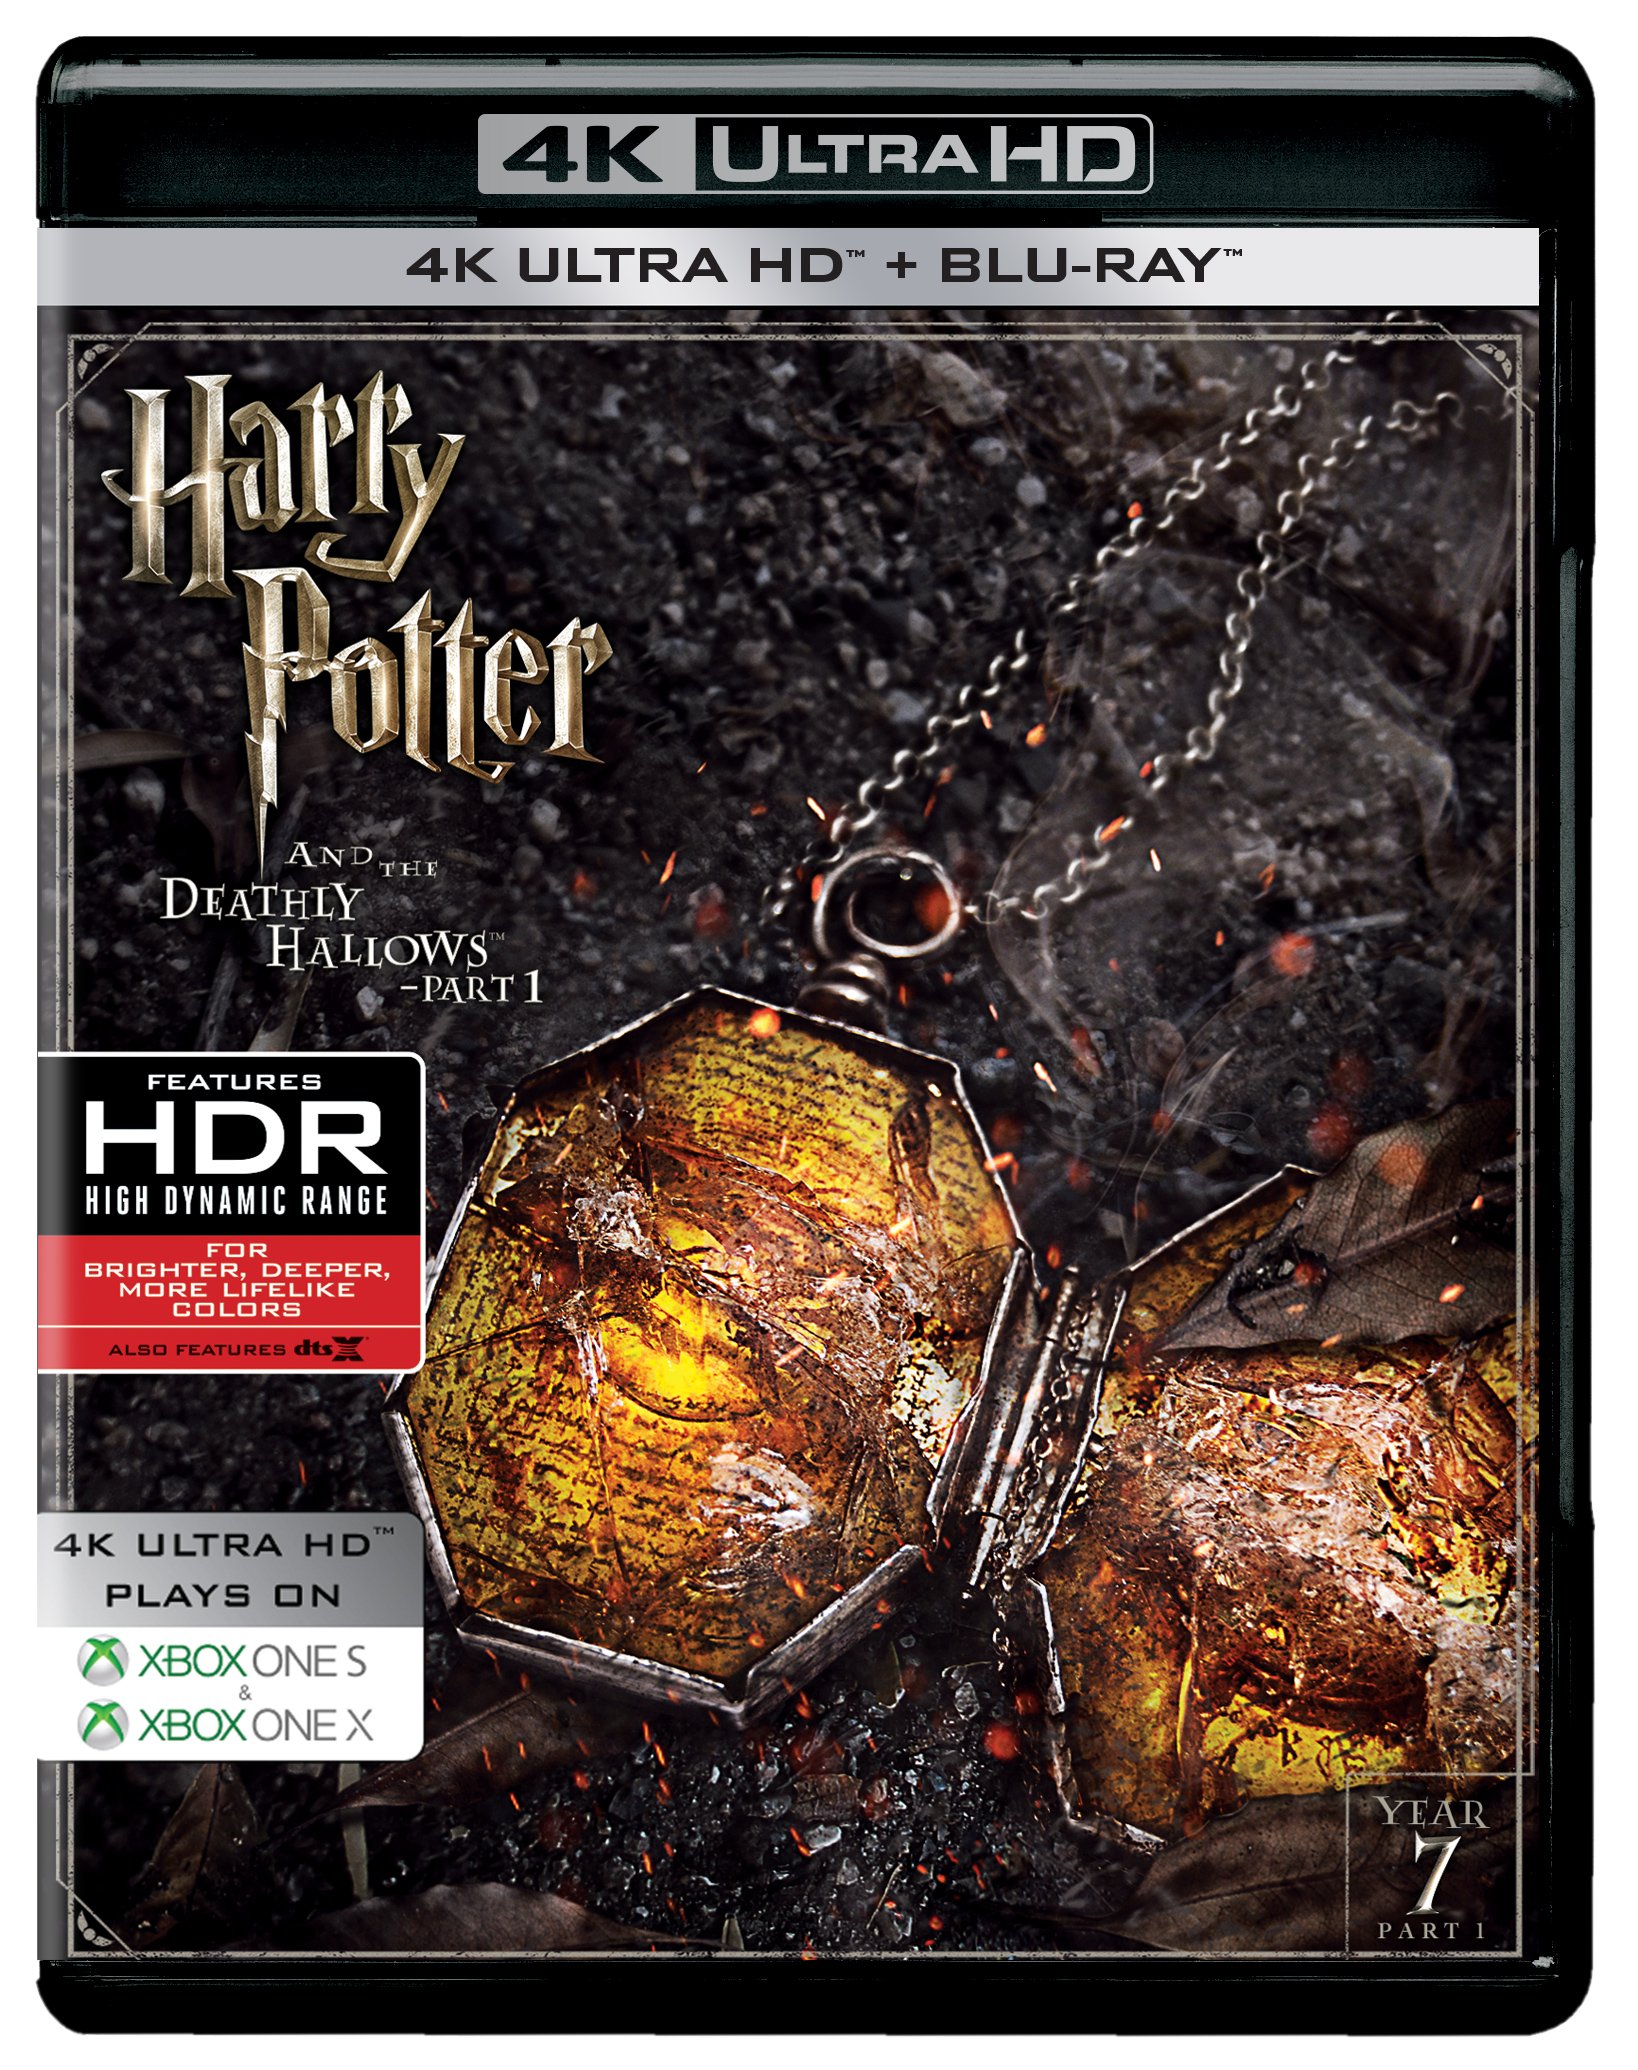 harry-potter-and-the-deathly-hallows-part-1-2010-year-7-4k-uhd-hd-2-disc